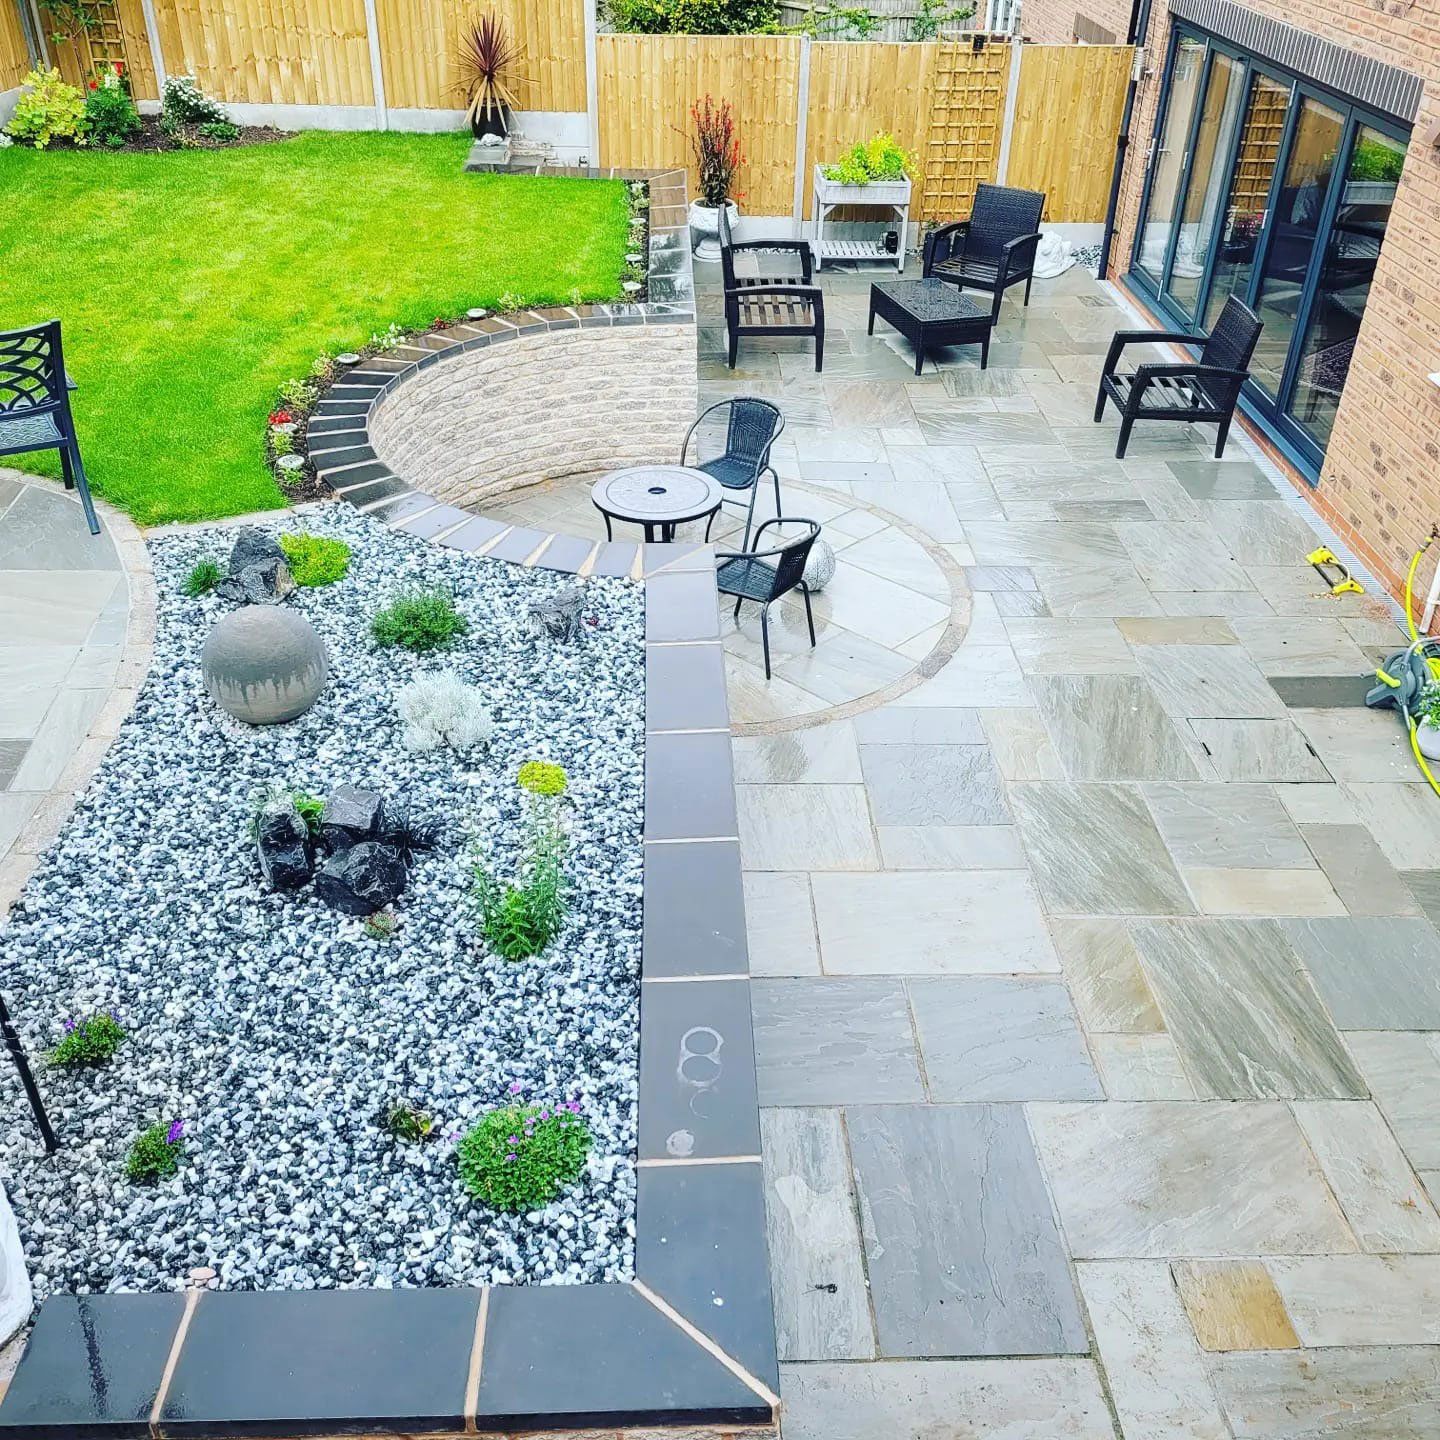 DNA Landscapes landscaping project in Coventry